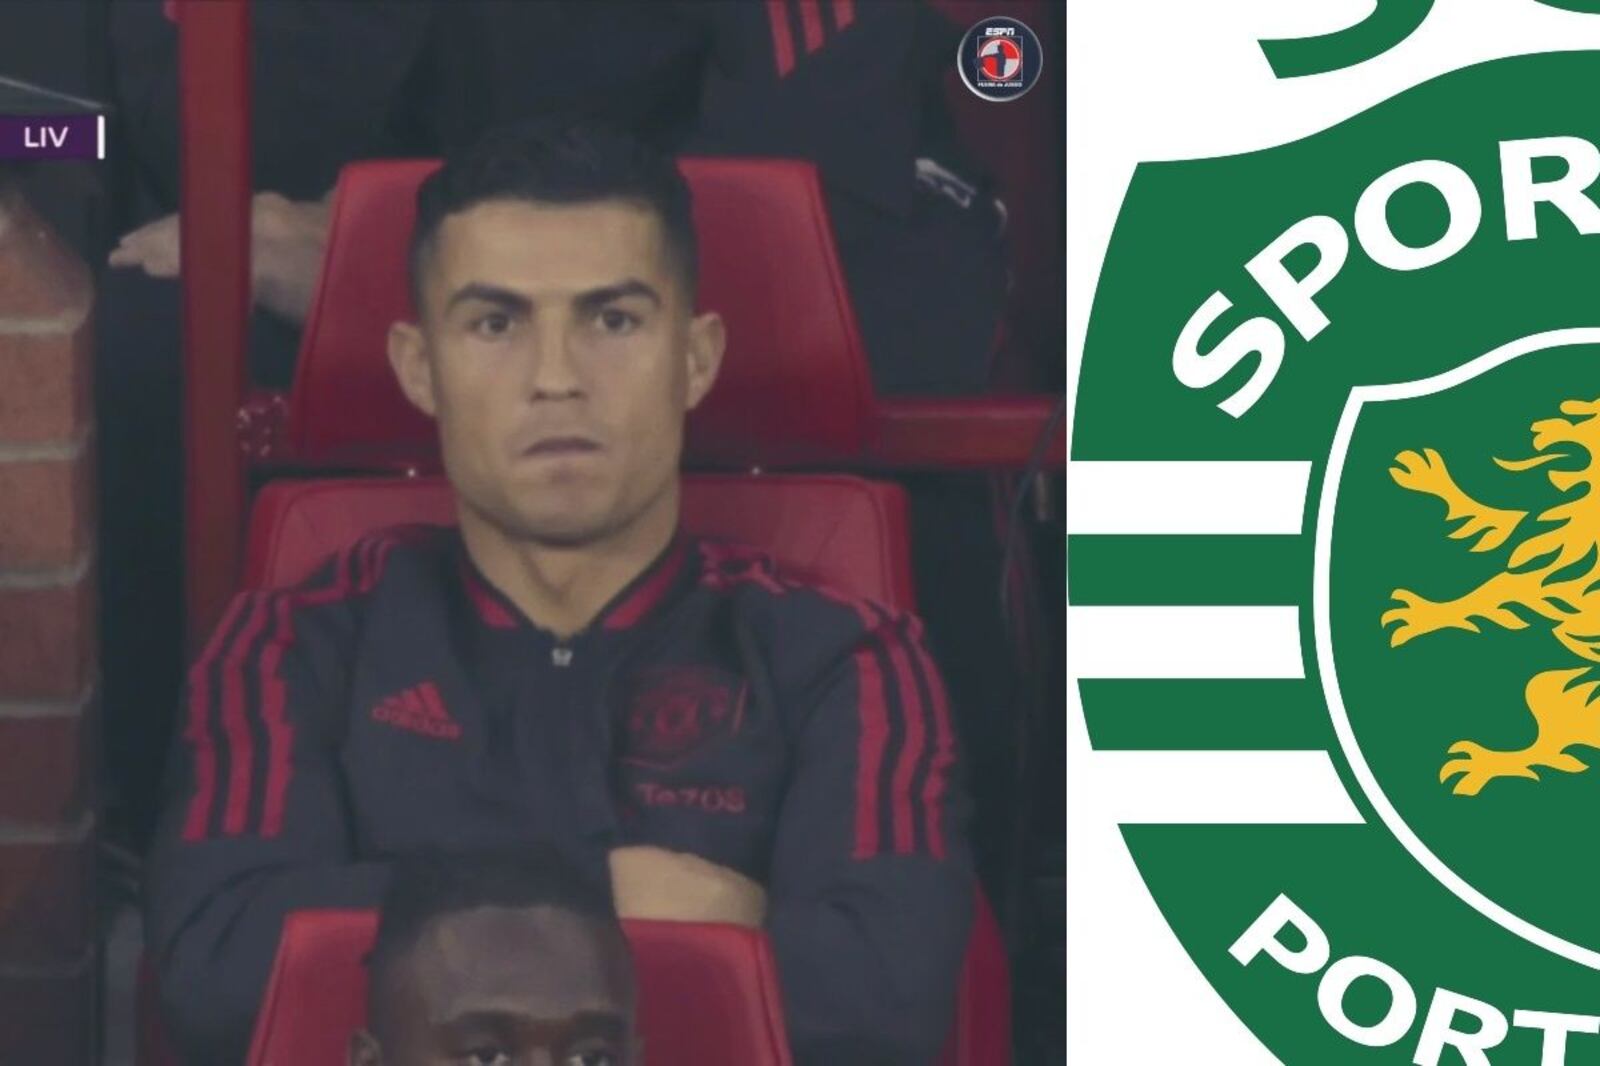 Cristiano Ronaldo still hasn't signed with Sporting and is already causing problems at that club